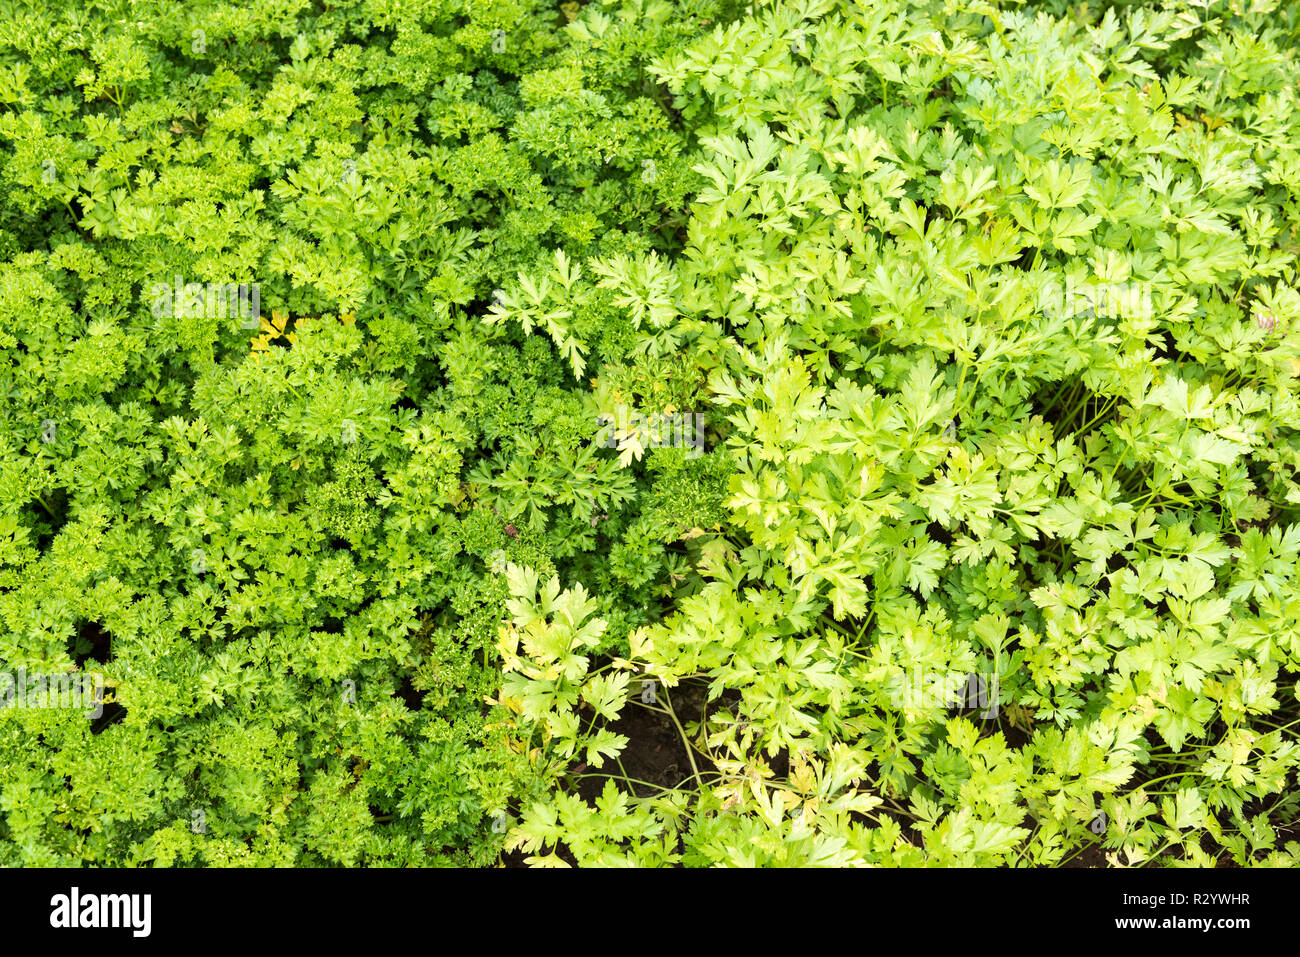 Parsley flat and curled in a vegetable garden in summer, Moselle, France Stock Photo